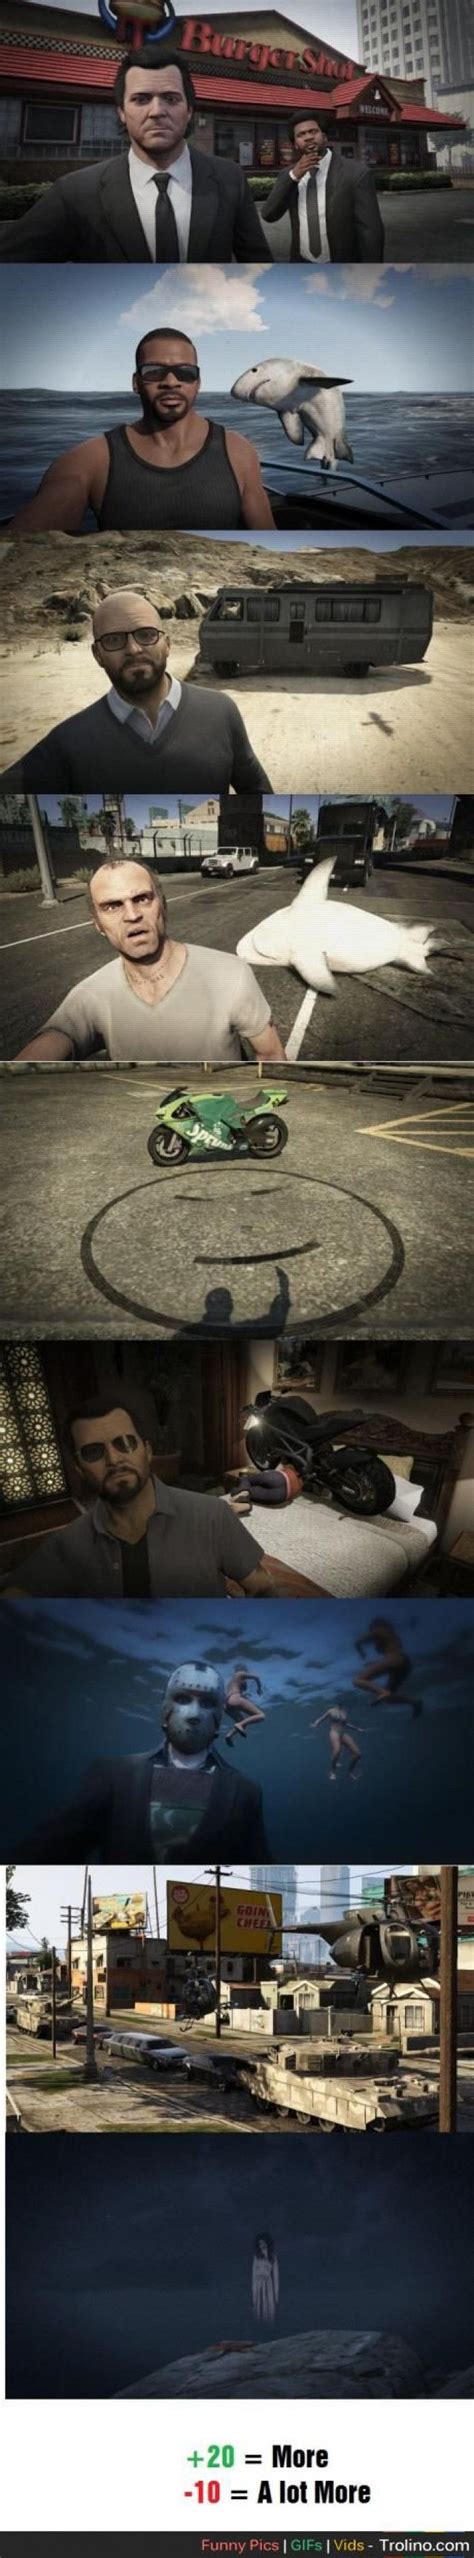 10 Gta V Selfies That Show How Fun The Game Can Be Gta Grand Theft